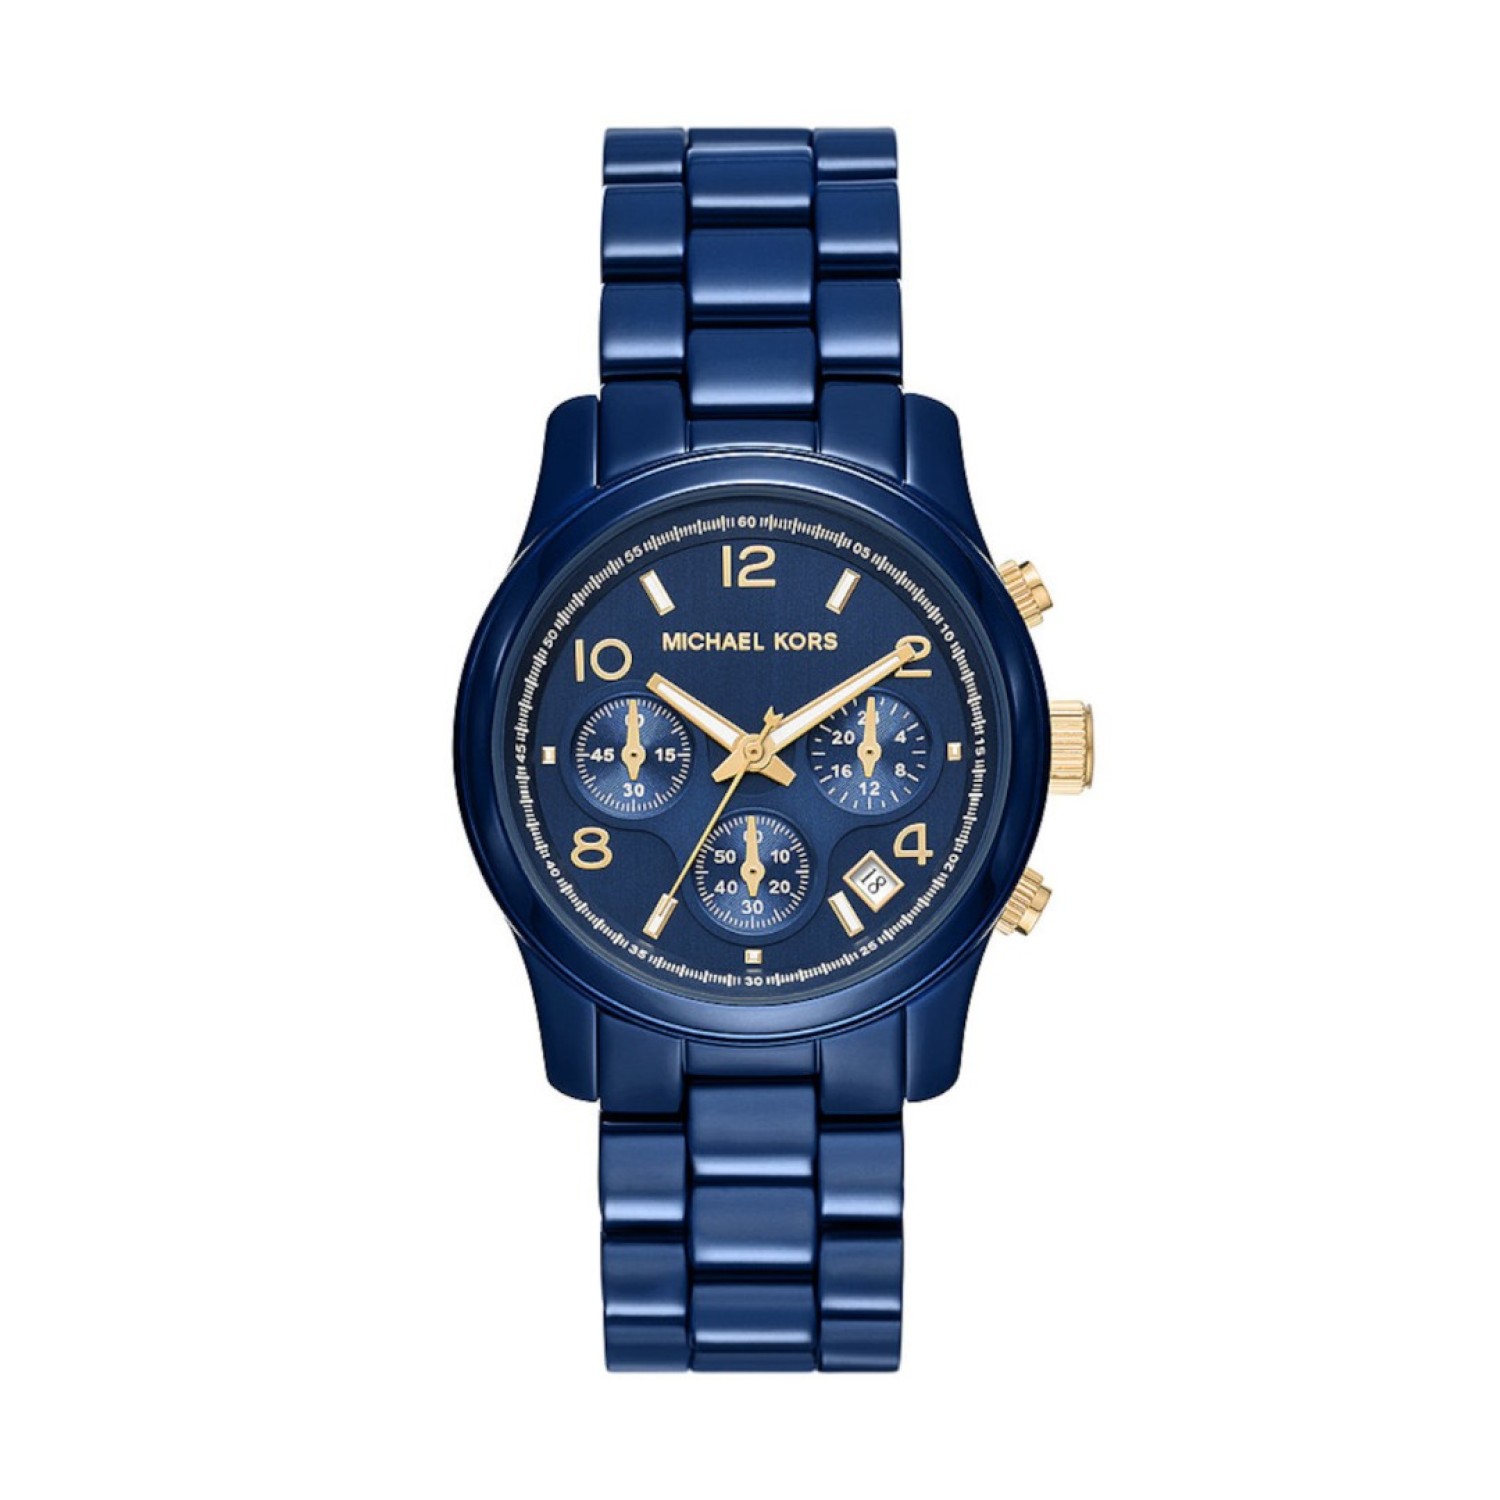 MK7332 Michael Kors Runway Chronograph Navy-Coated Stainless Steel Watch. The MK7332 is a Ladie's wristwatch model from the designer brand Michael Kors.